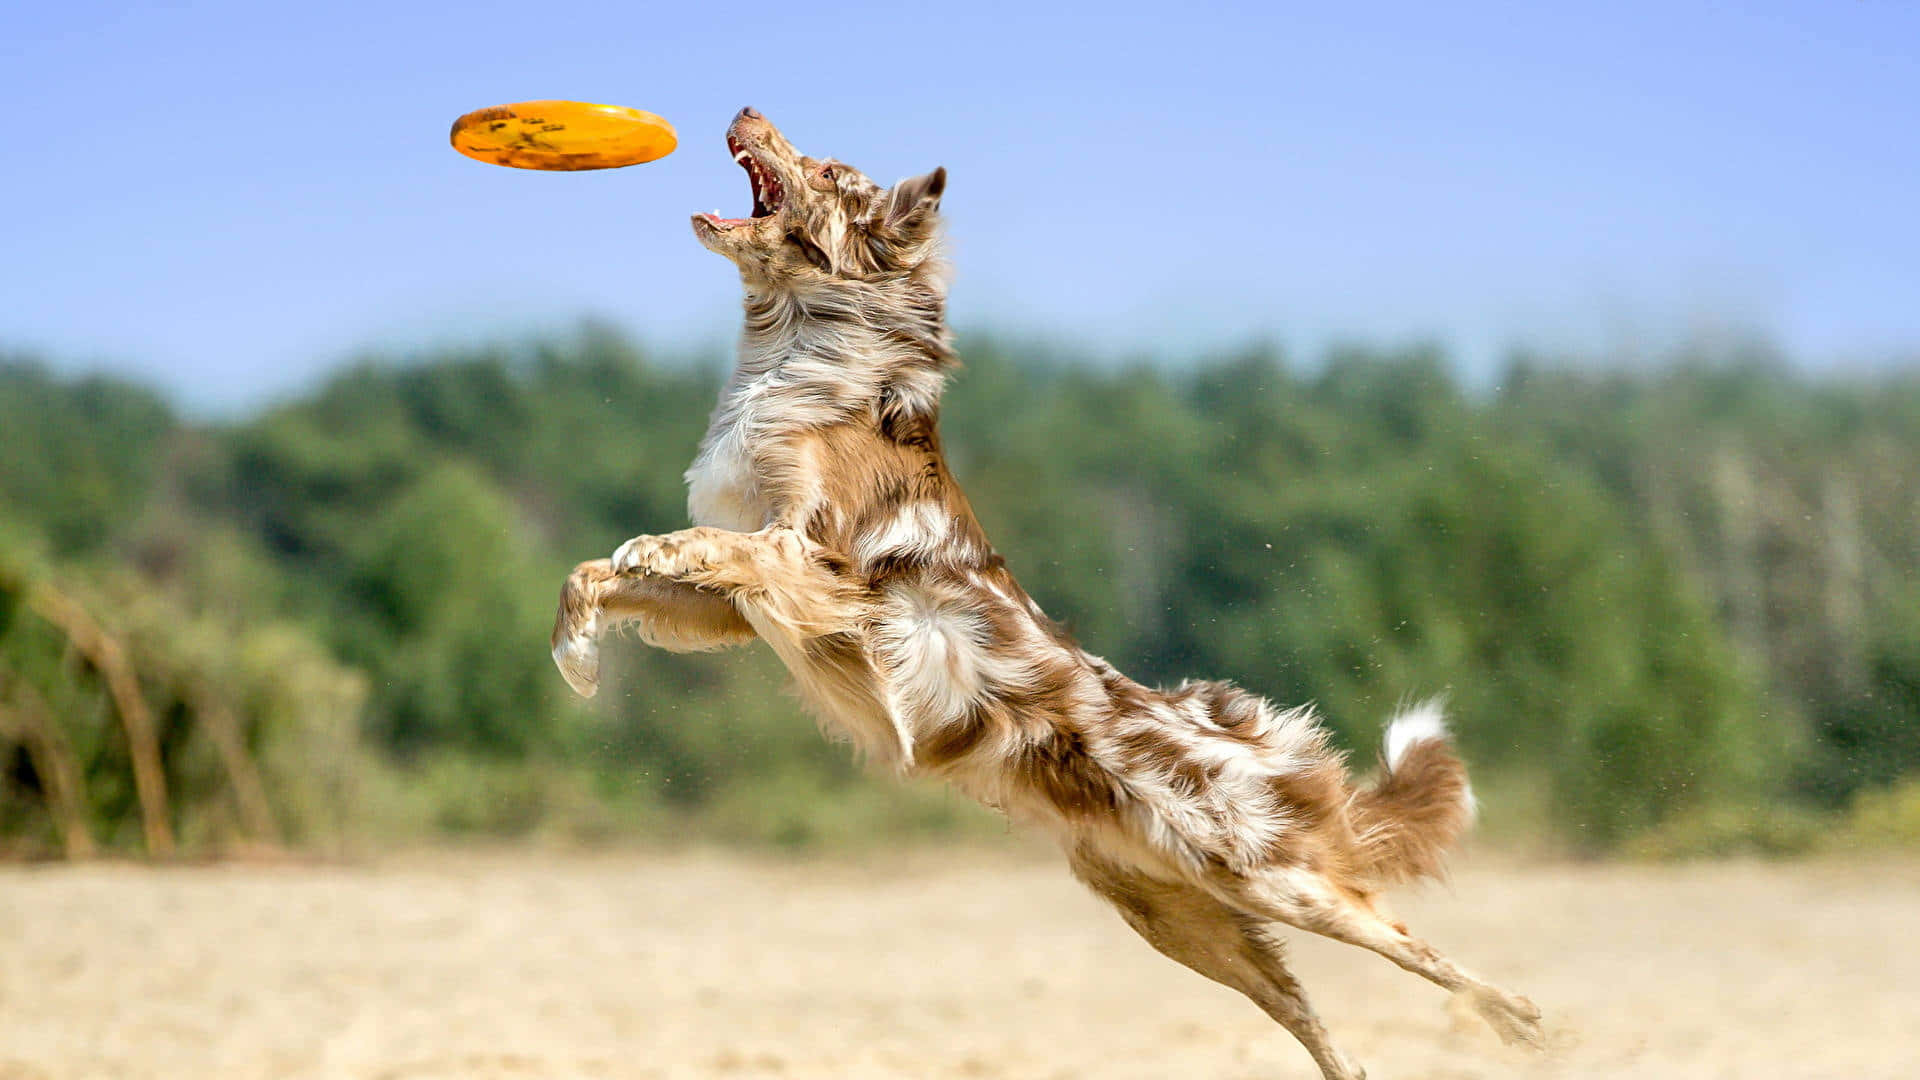 Dog Catching Best Ultimate Frisbee Background